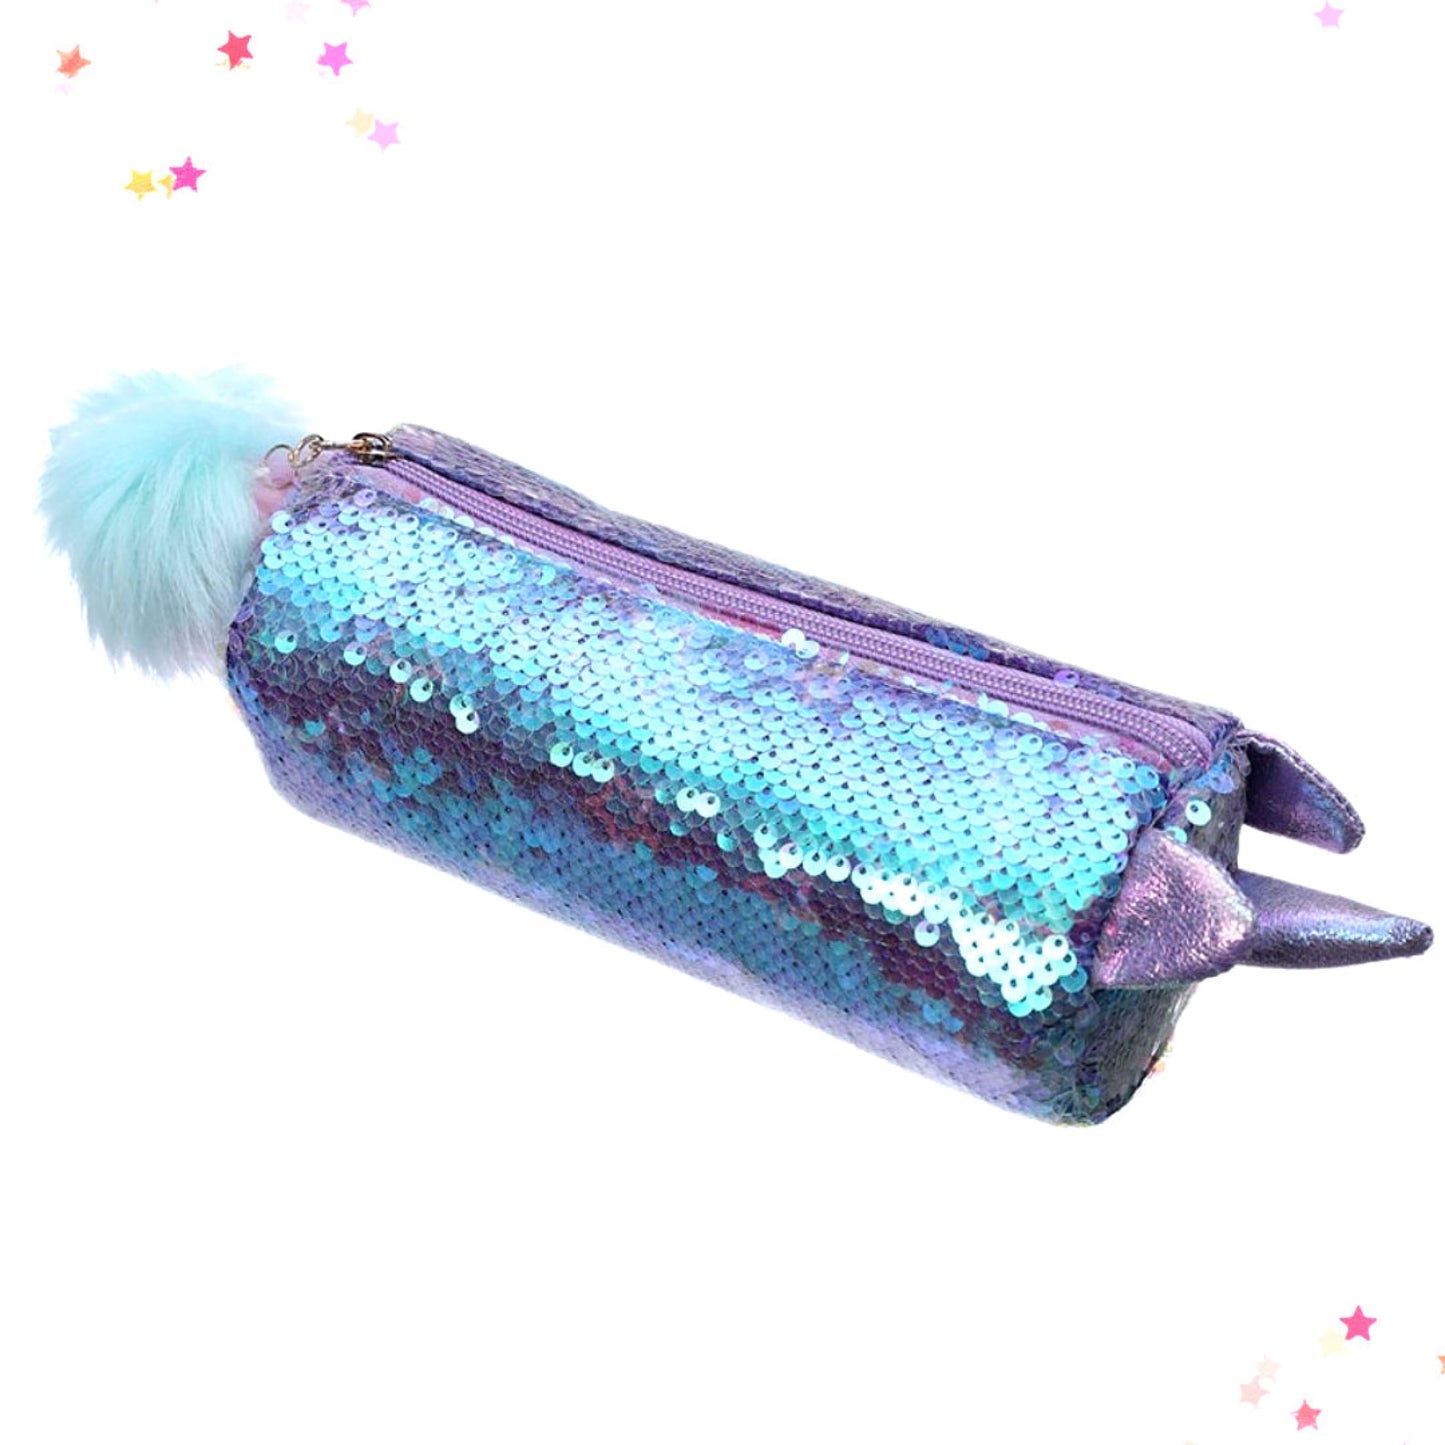 Iridescent Sequin Unicorn Pencil Case in Purple from Confetti Kitty, Only 8.99